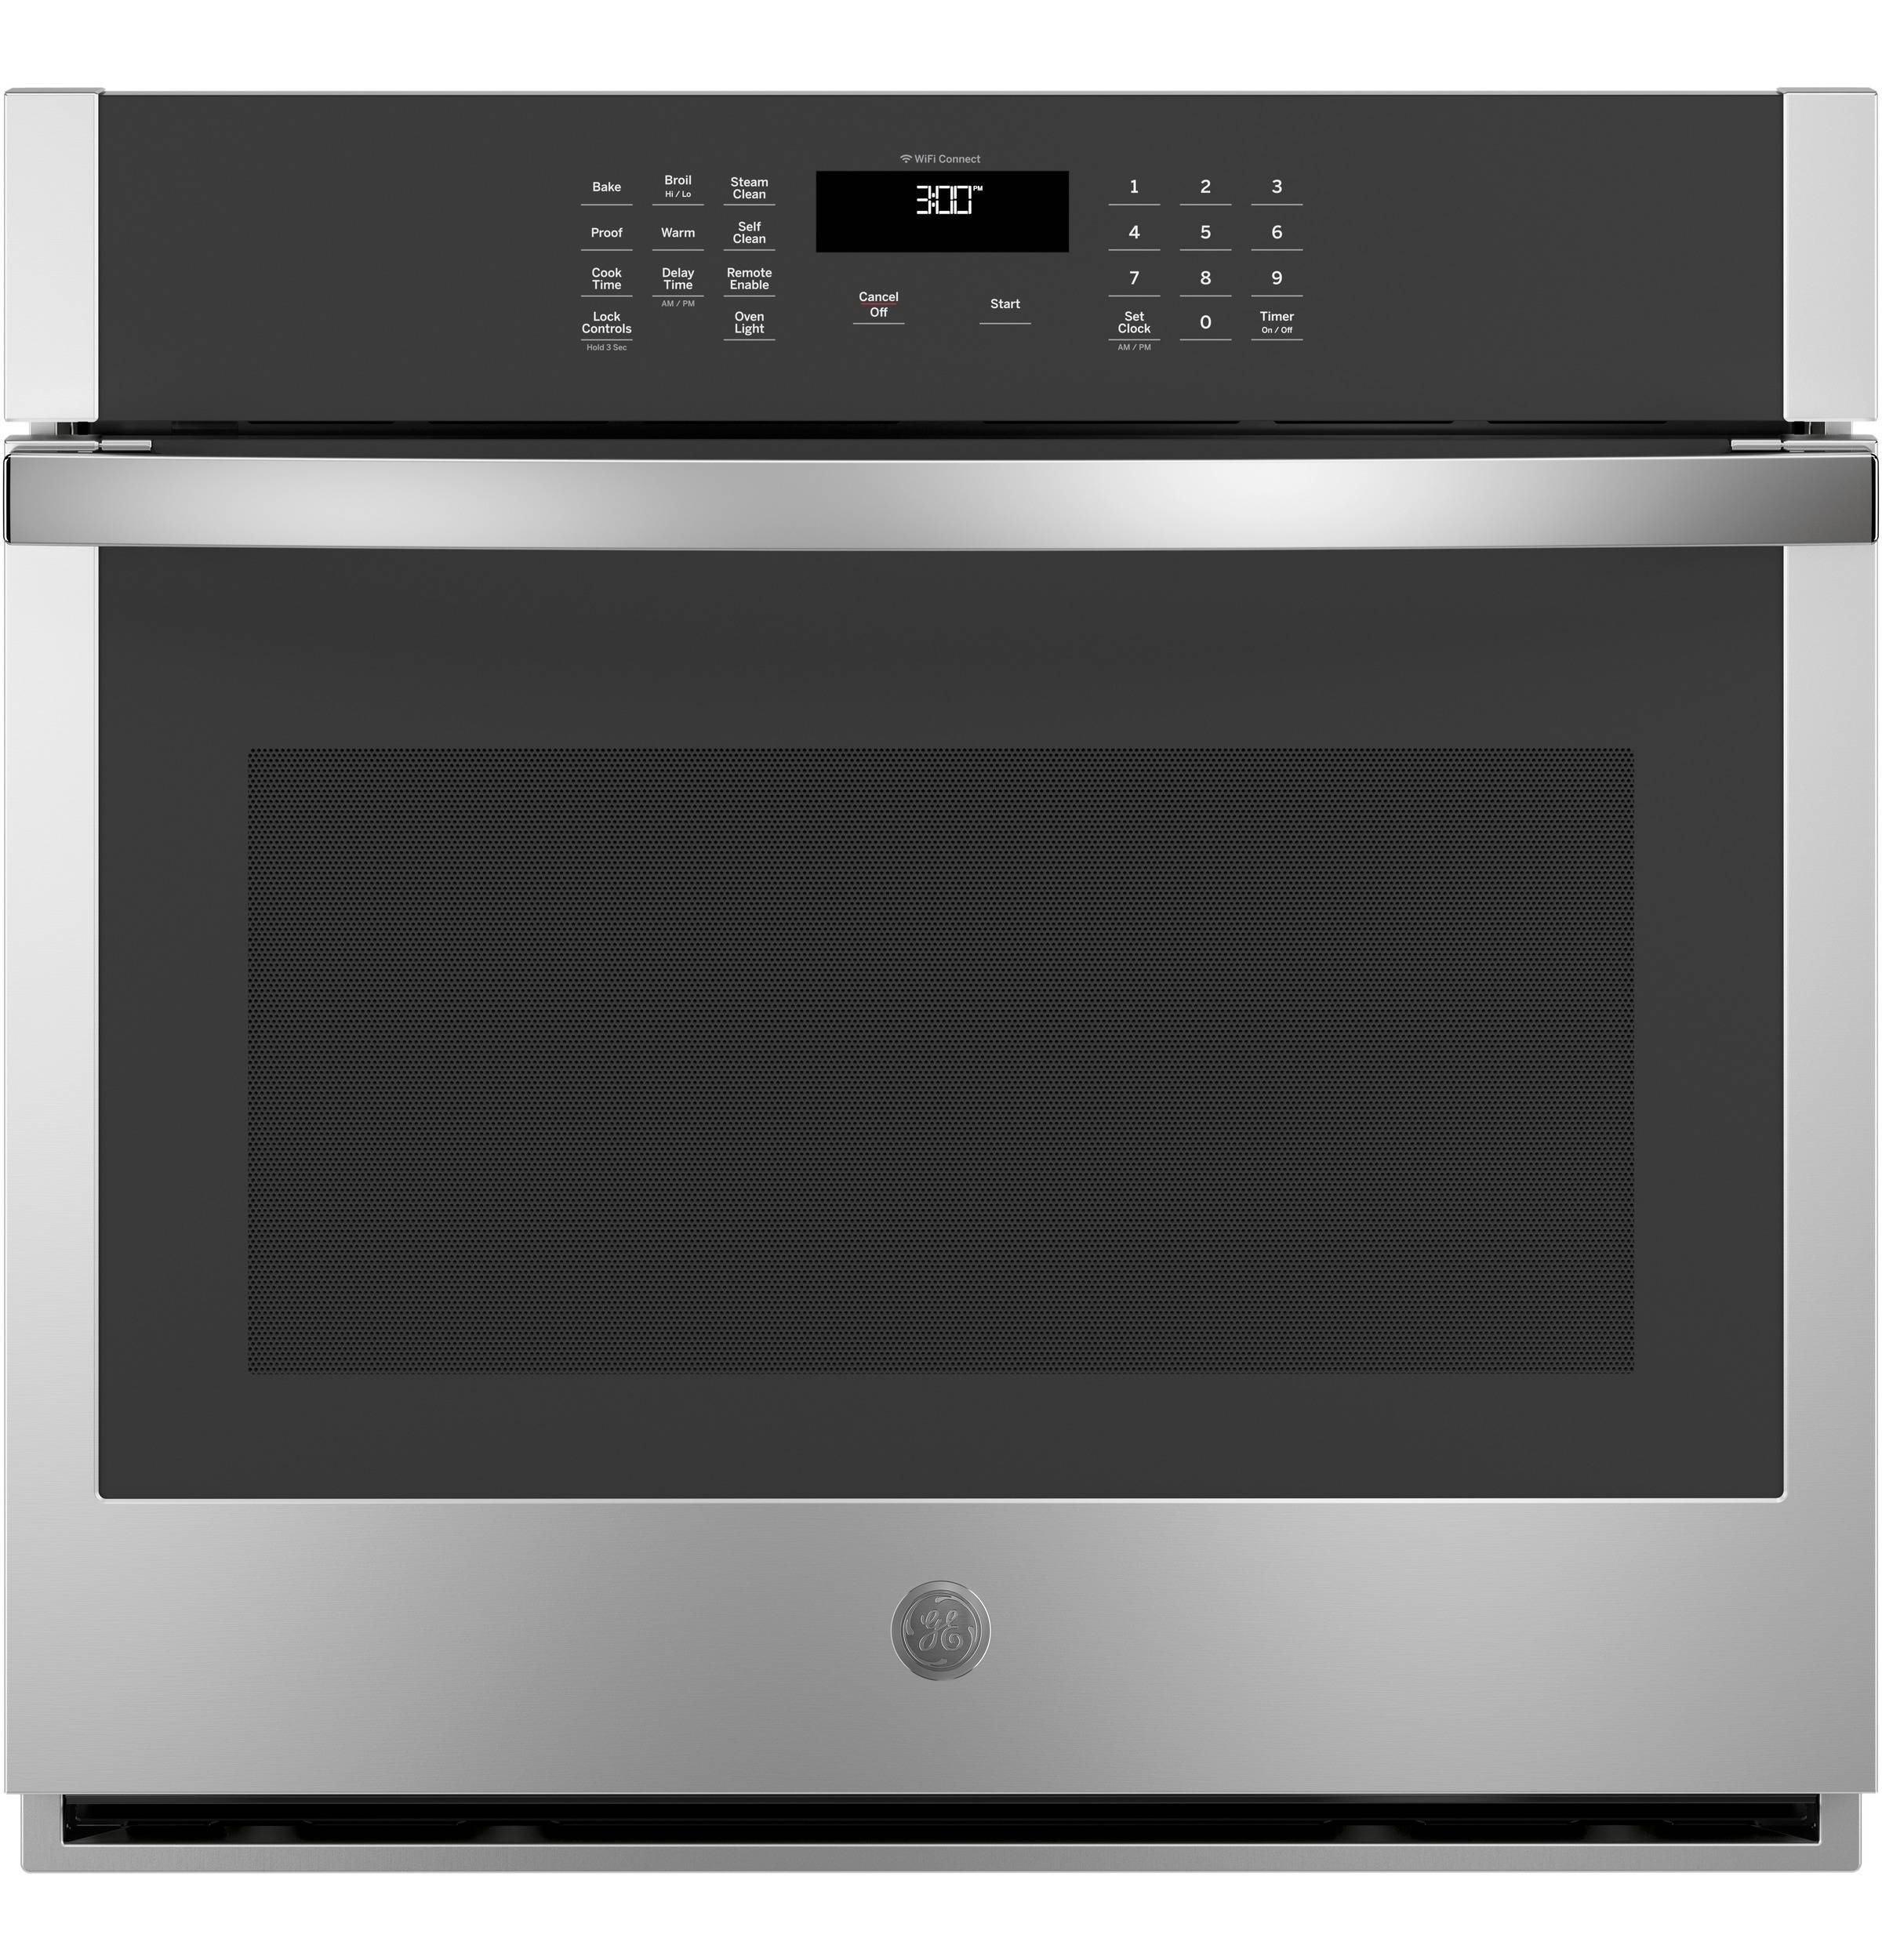 GE® 30" Built-In Single Wall Oven (Stainless Steel)